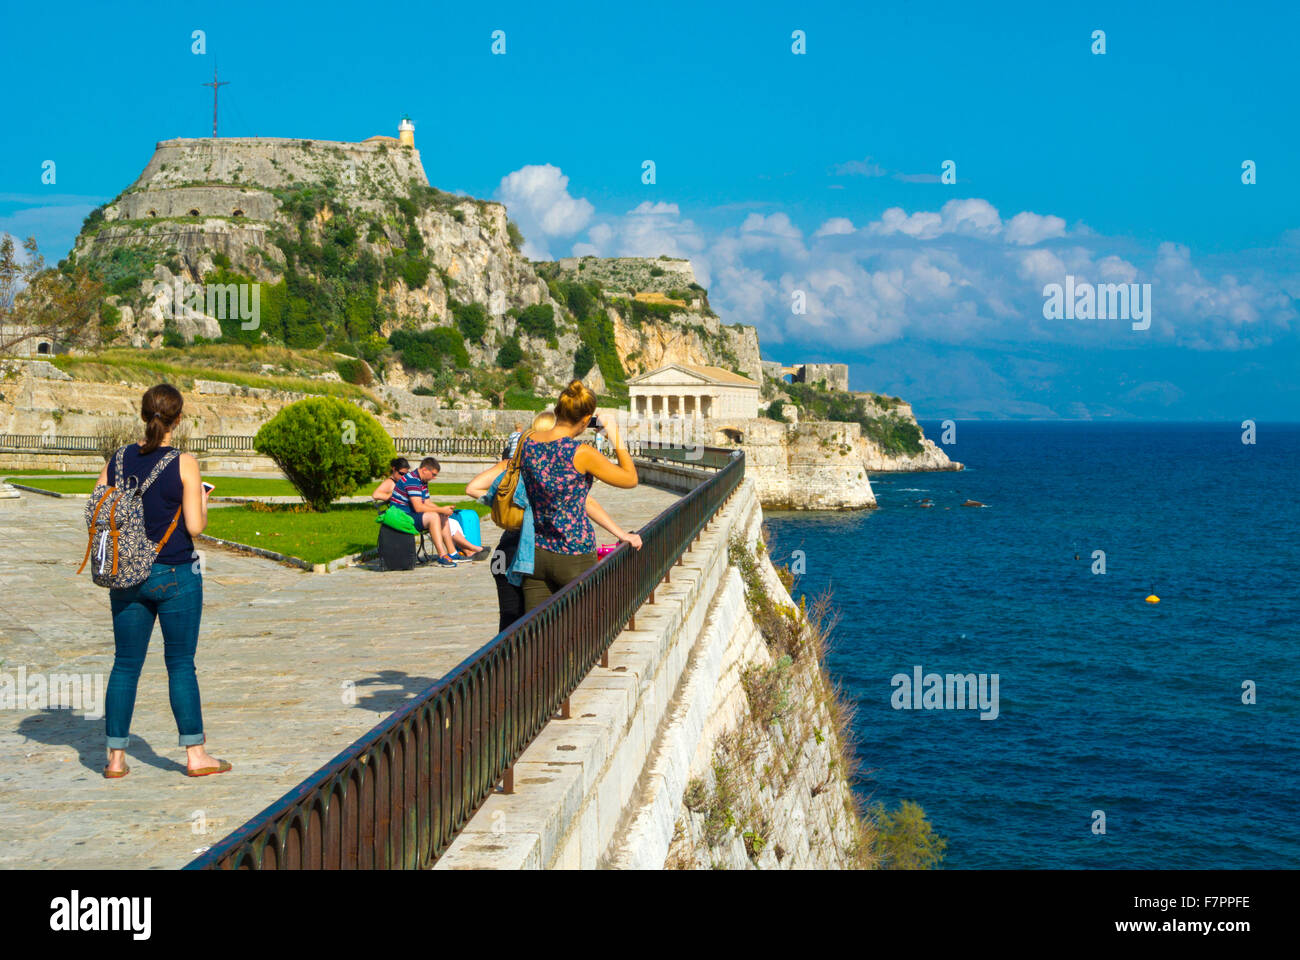 Promontory with Old Fortress in background, Corfu town, Corfu Island, Ionian islands, Greece Stock Photo